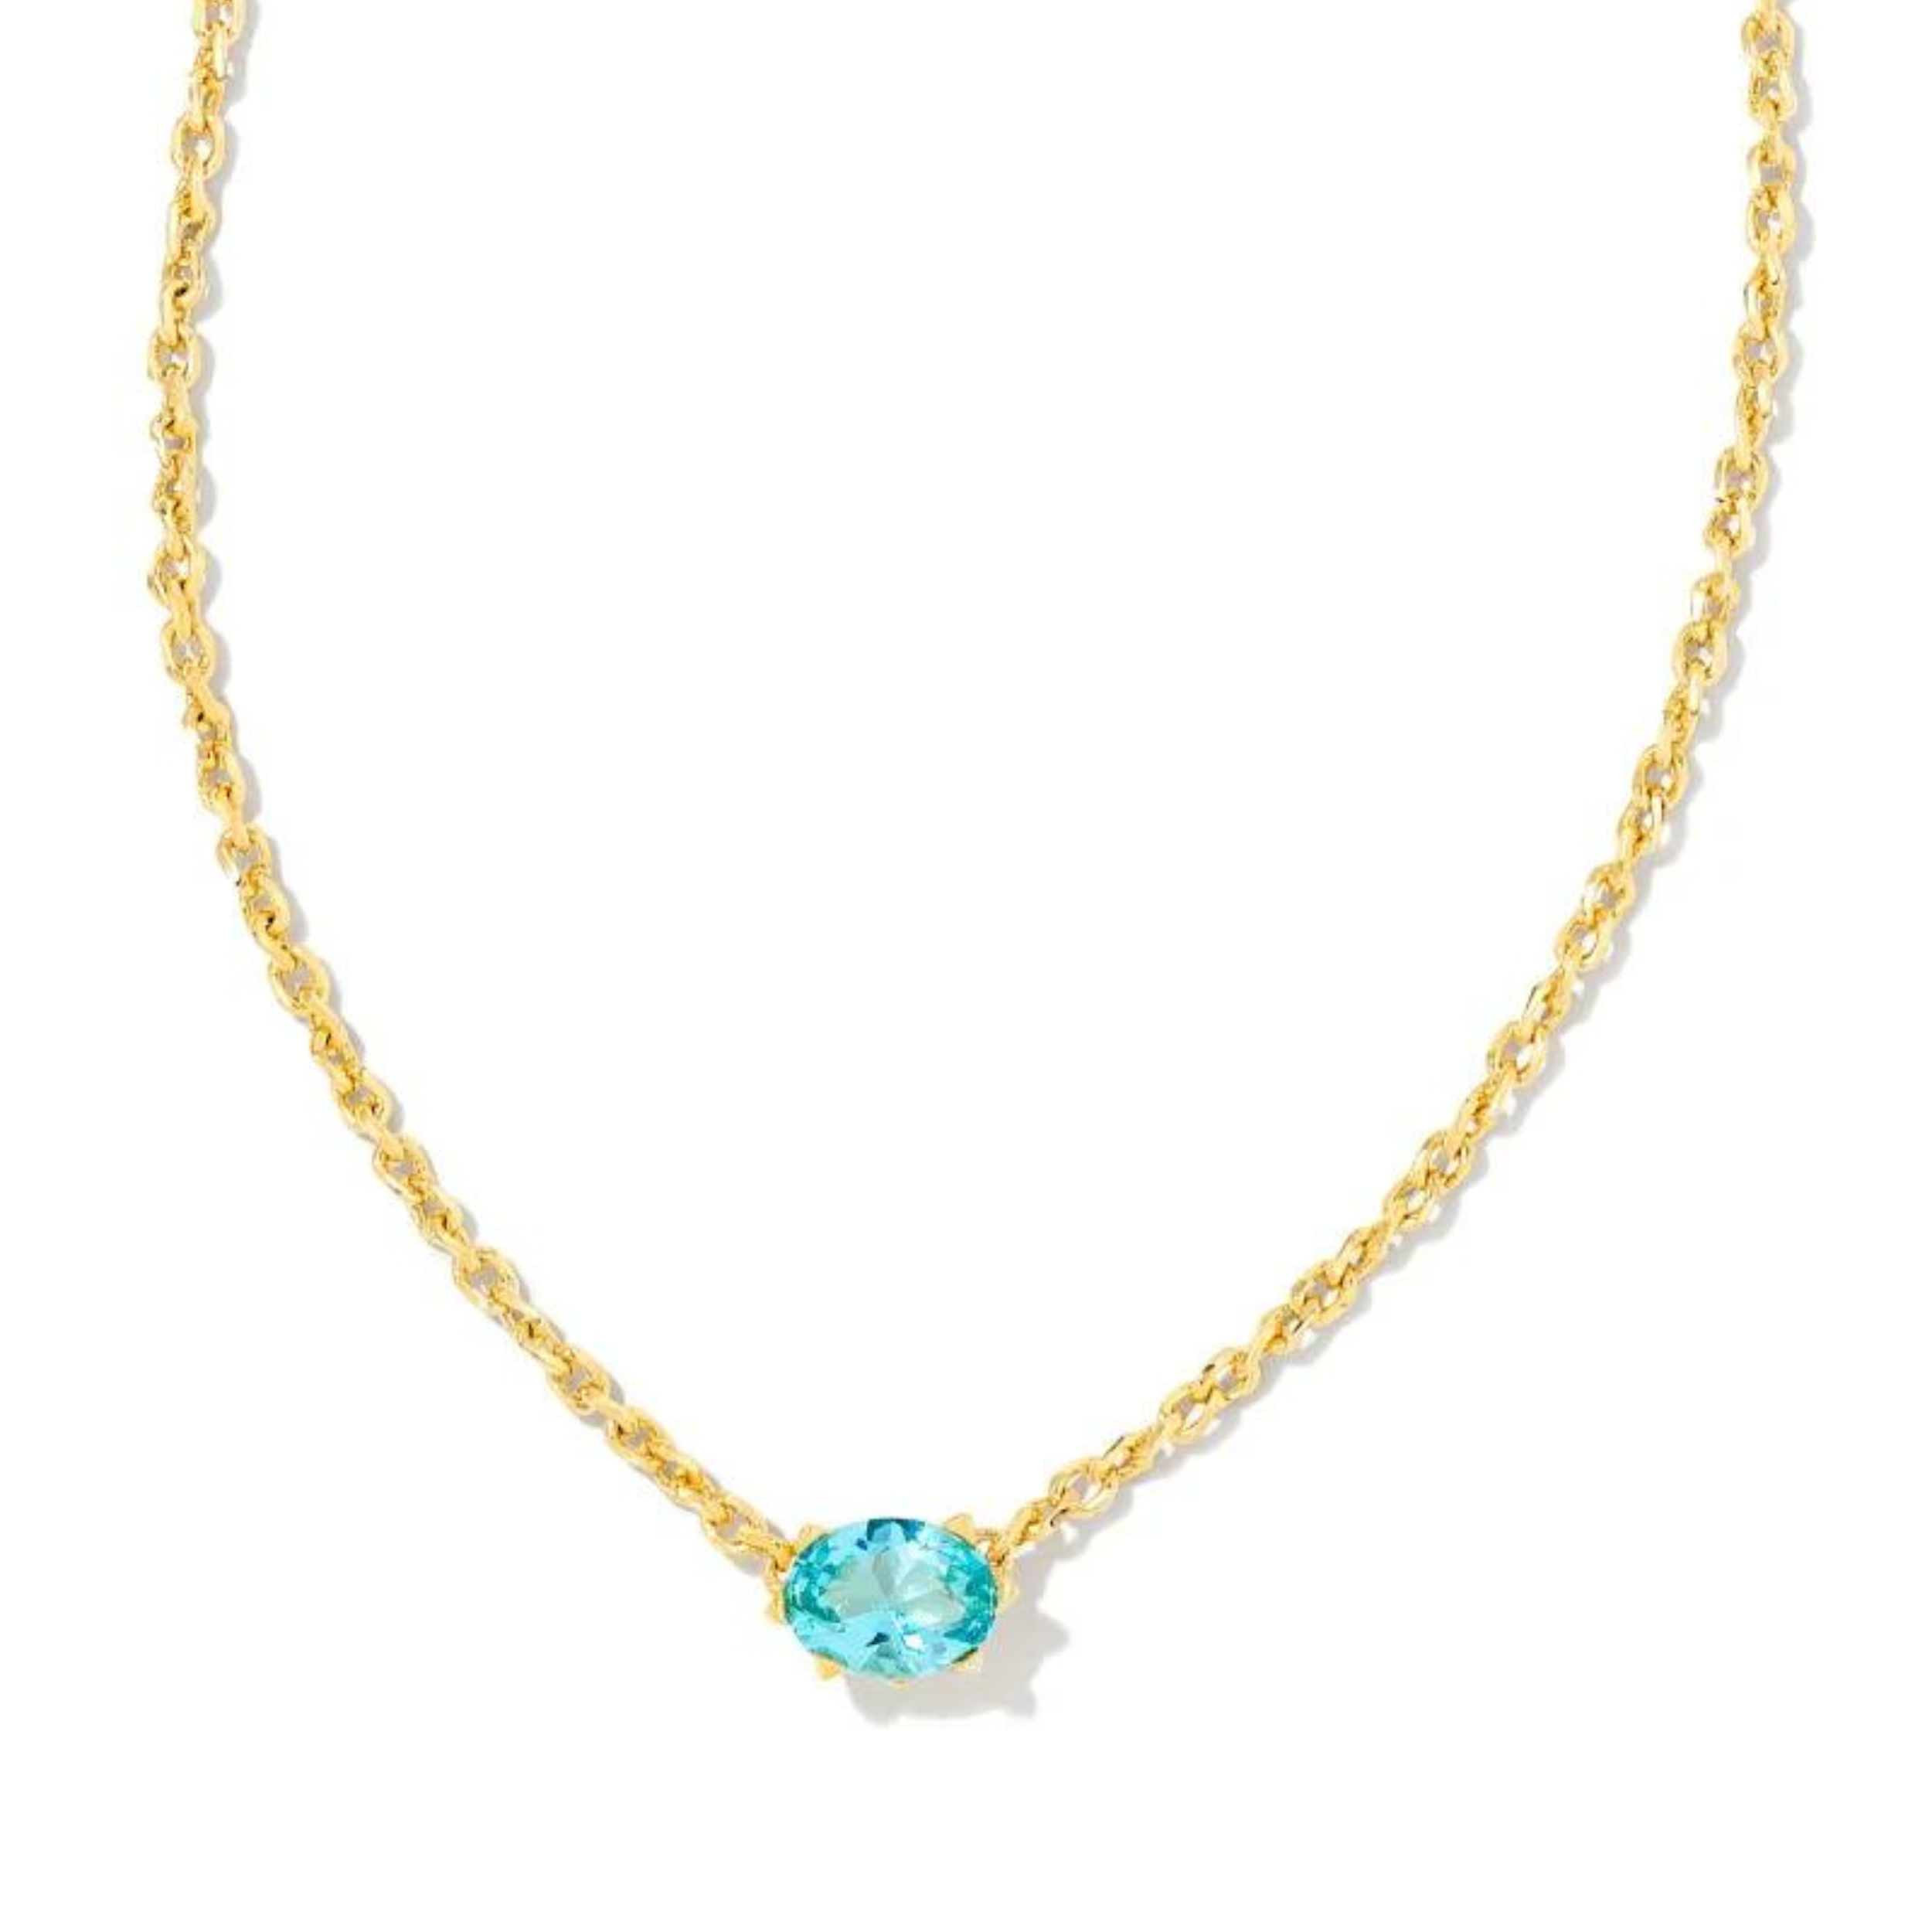 Gold chain necklace with am aqua crystal pendant, pictured on a white background.